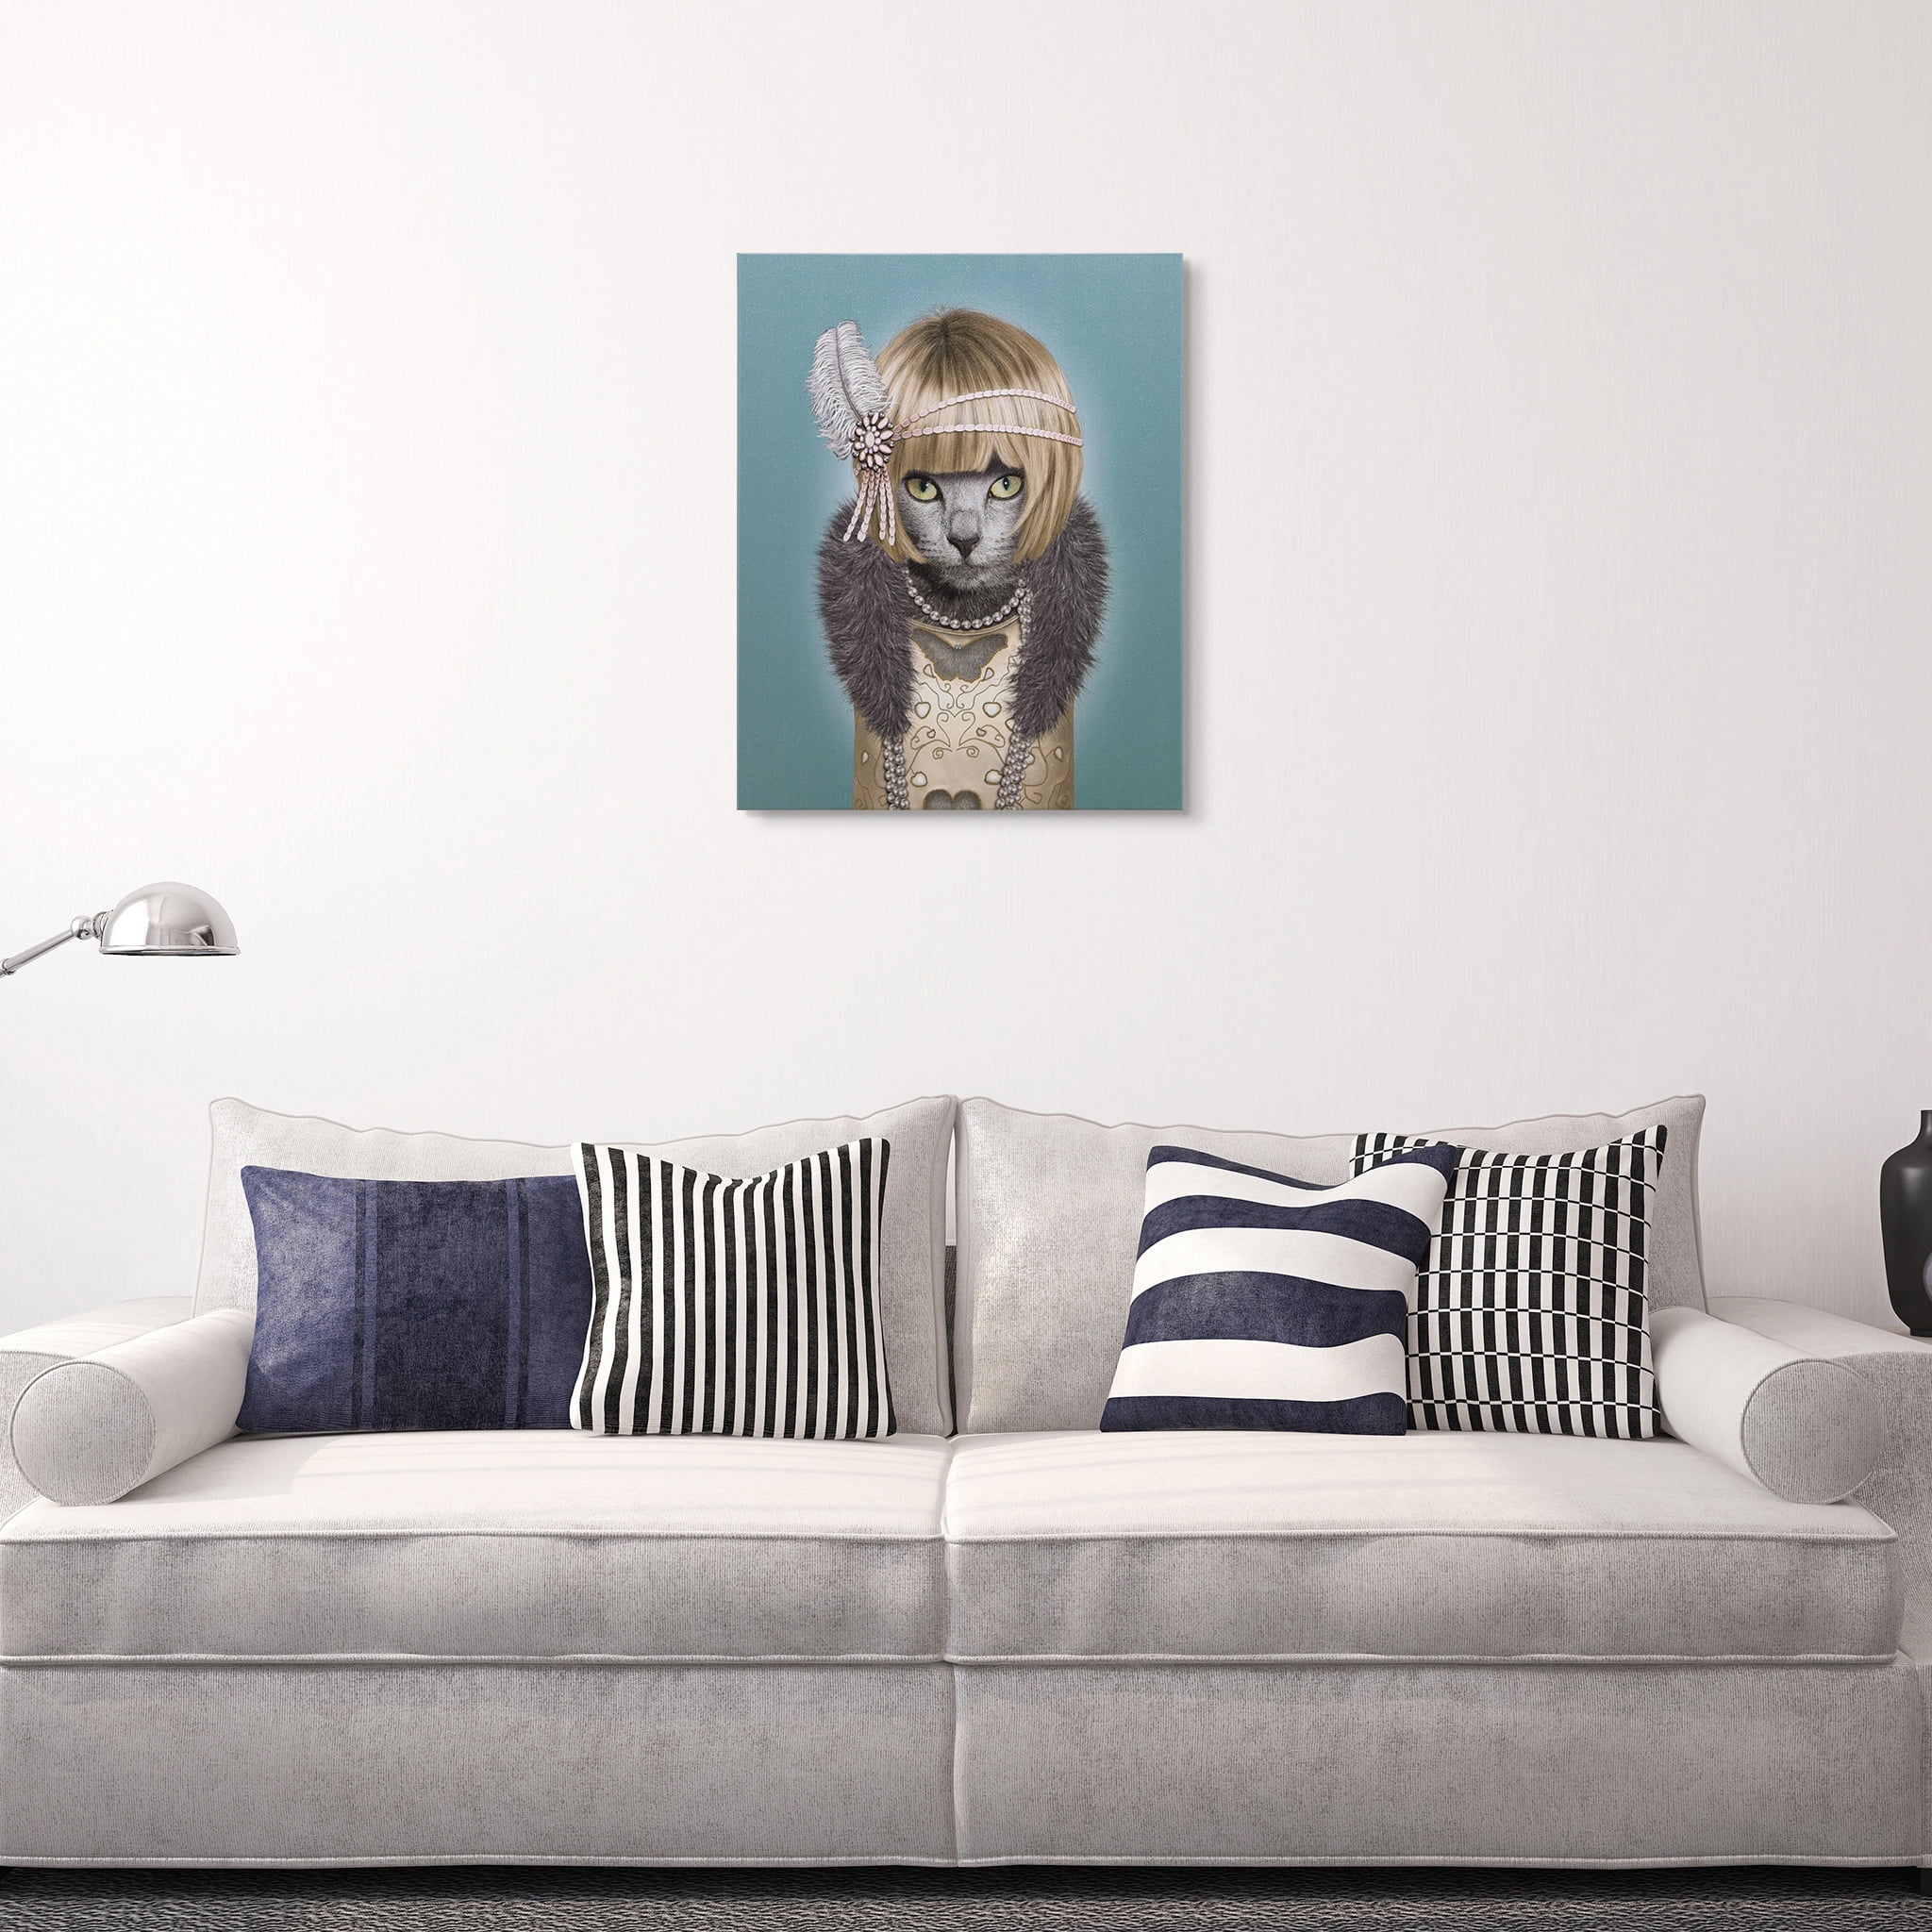 Empire Art Direct Cat On A Throne Graphic Art Print on Wrapped Canvas Cat  Pet Wall Art GIC-H1440-1818 - The Home Depot